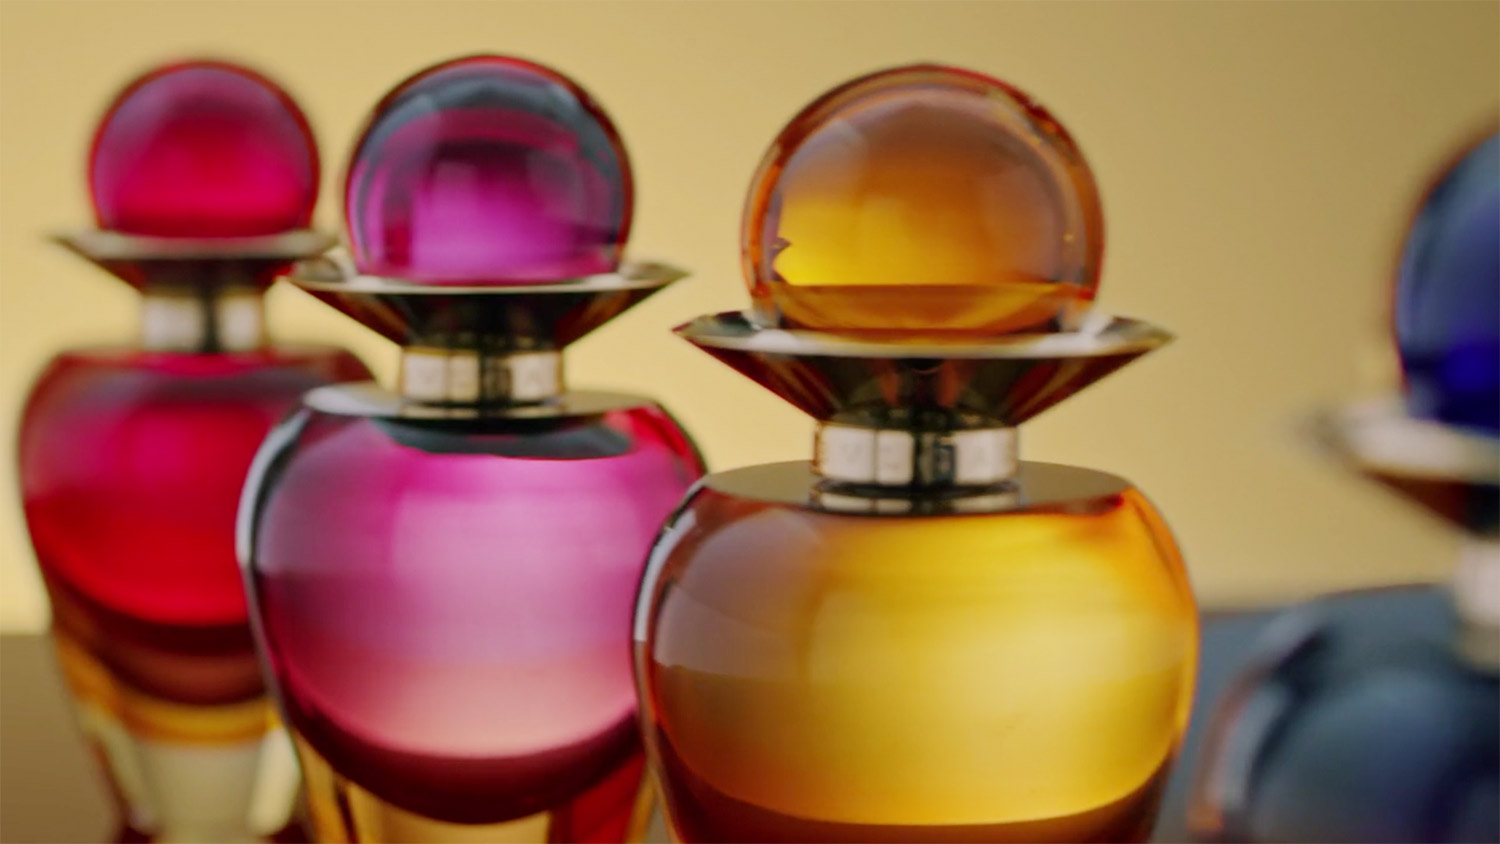 Bvlgari Le Gemme Murano Collection ~ Fragrance News